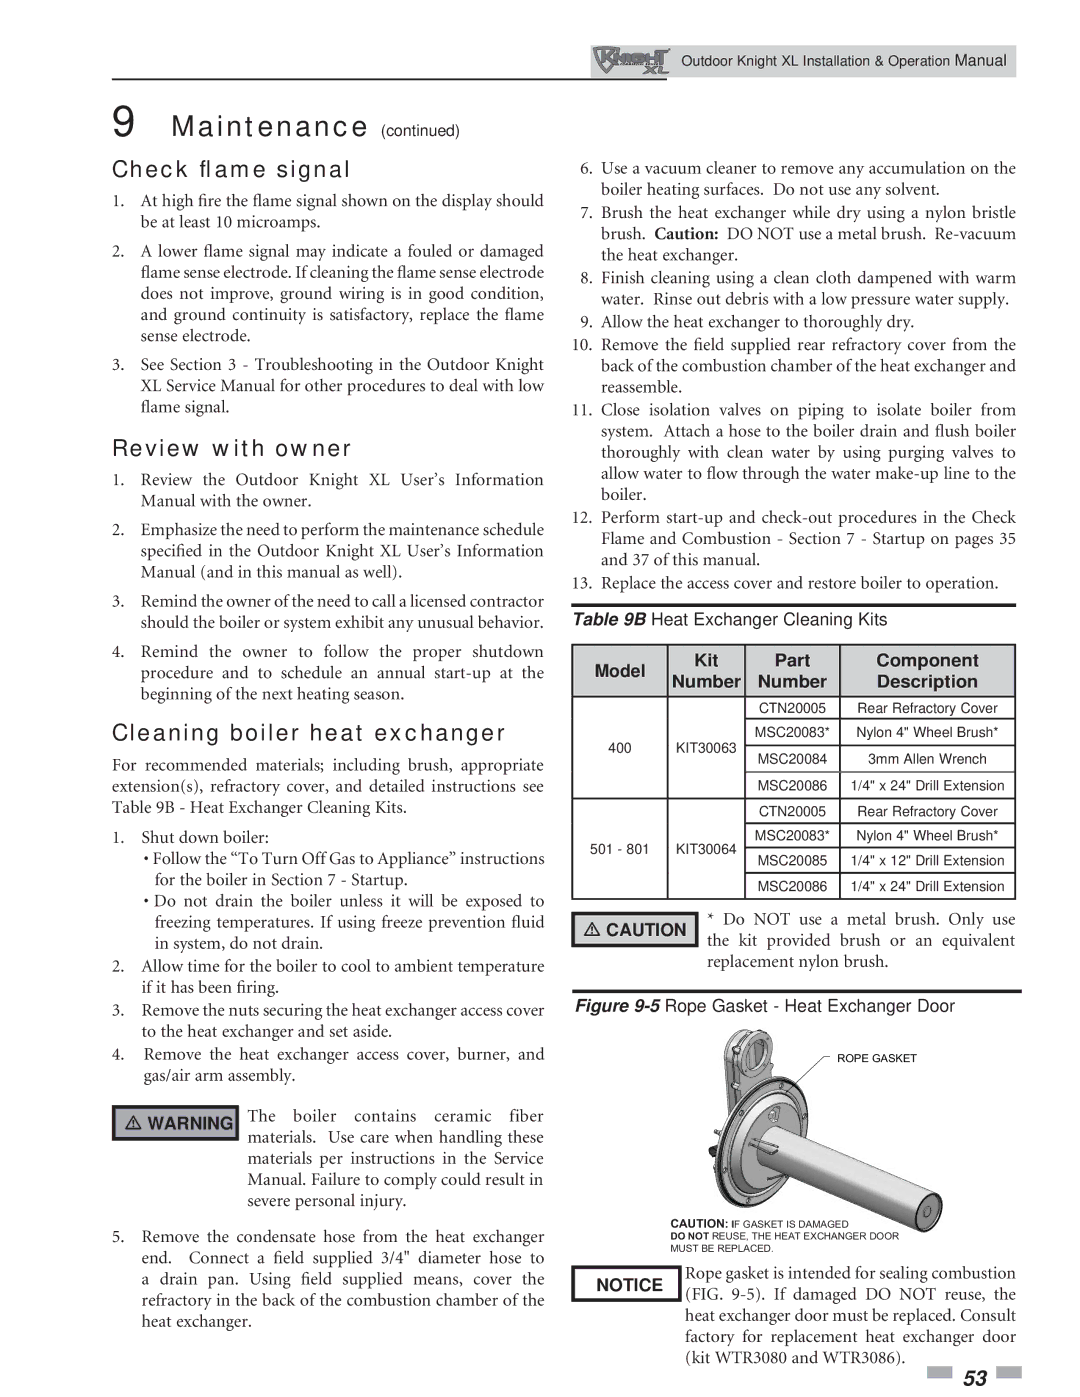 Lochinvar 400-801 operation manual Check ﬂame signal, Review with owner, Cleaning boiler heat exchanger 